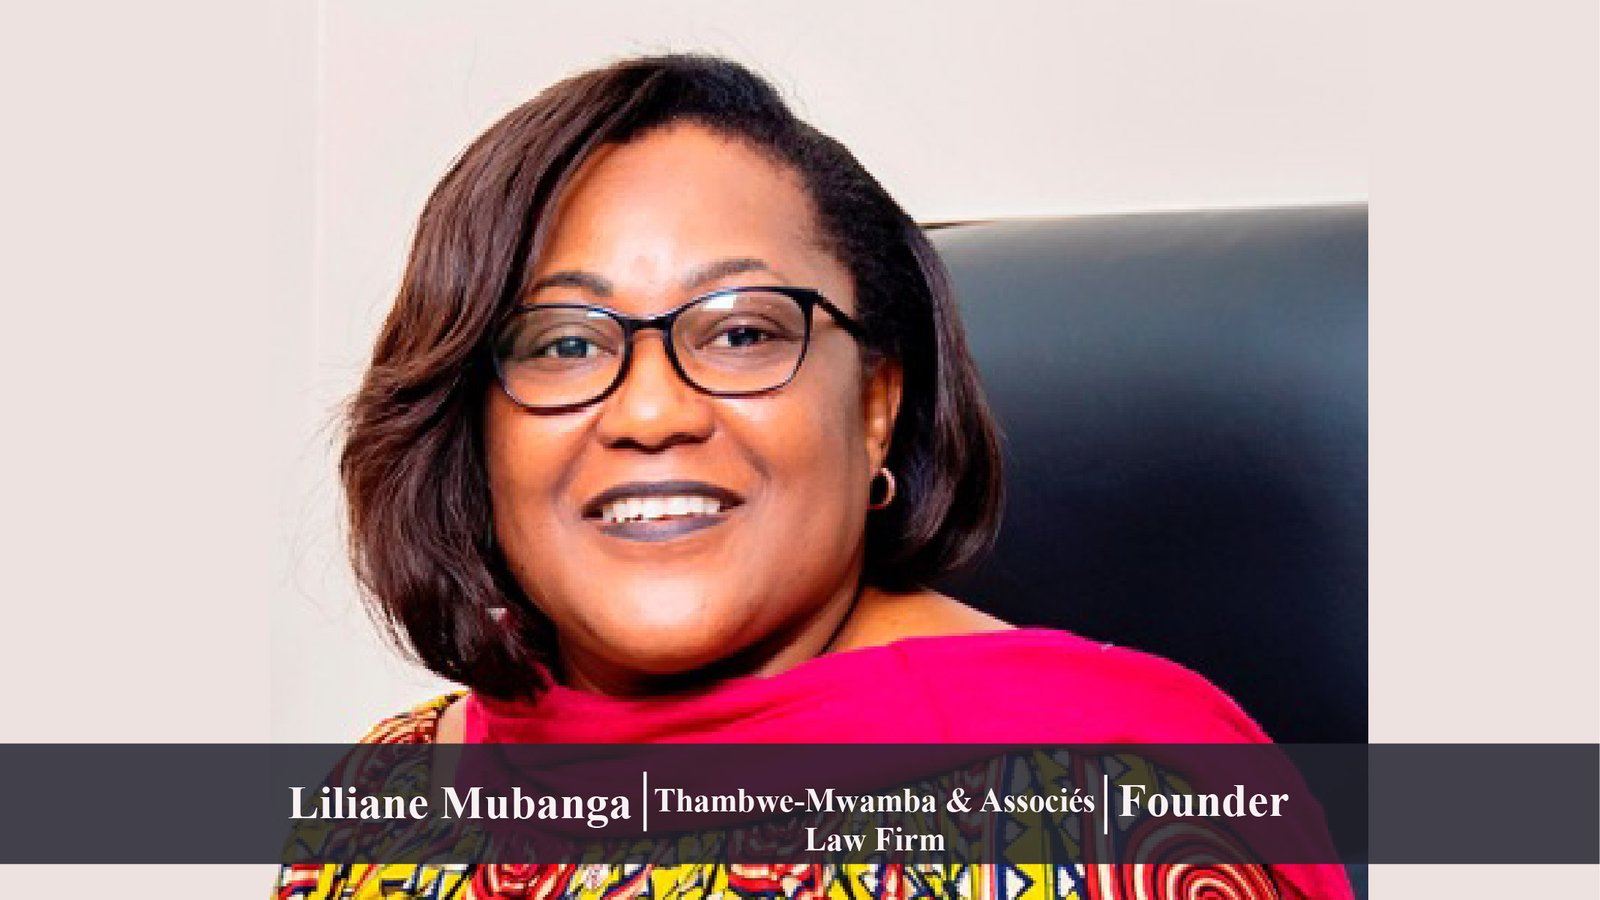 Thambwe-Mwamba & Associes law firm | Founder | A Combination of Passion, Motivation, and Experience: Meet the Excellent Legal Practitioner, Liliane Mubanga